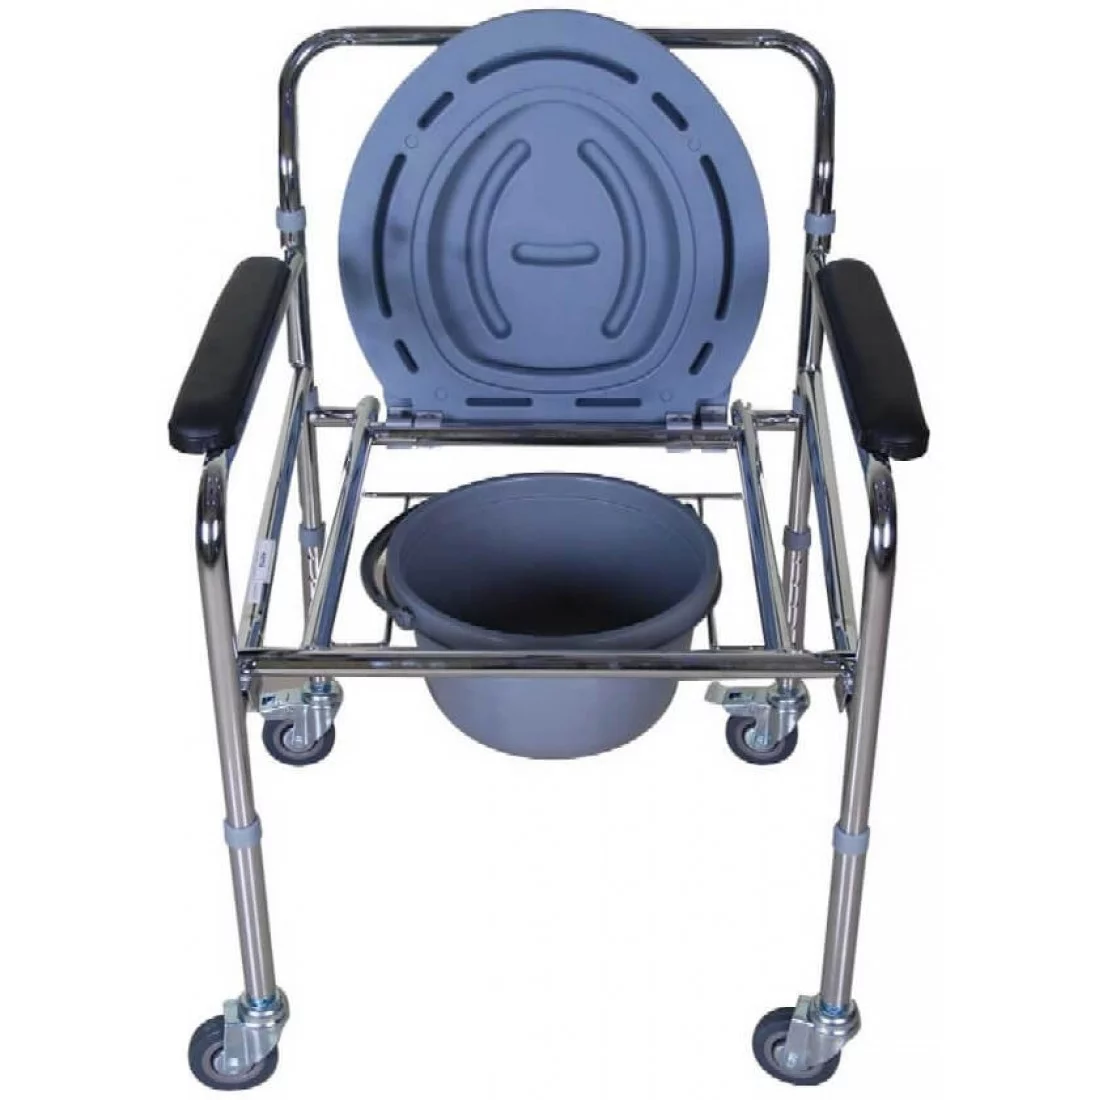 Karma Rainbow 5 Commode Chair Profile Front